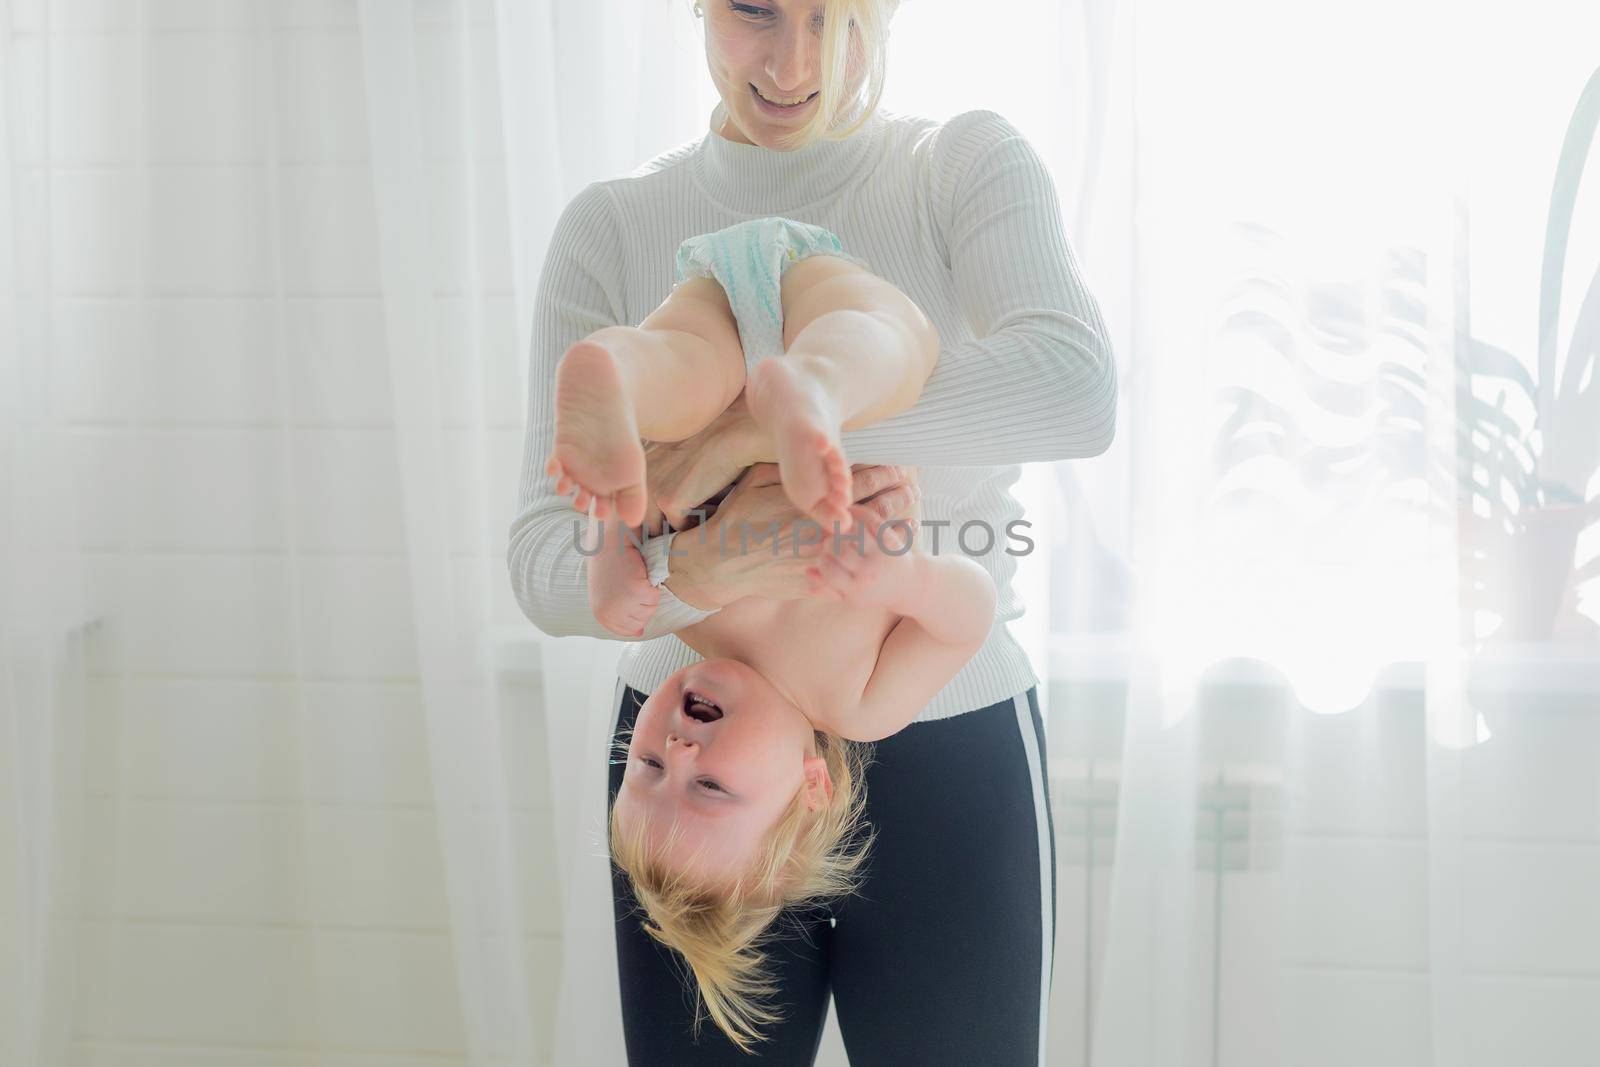 Mom holds the baby upside down, is engaged in children's gymnastics. by Yurich32